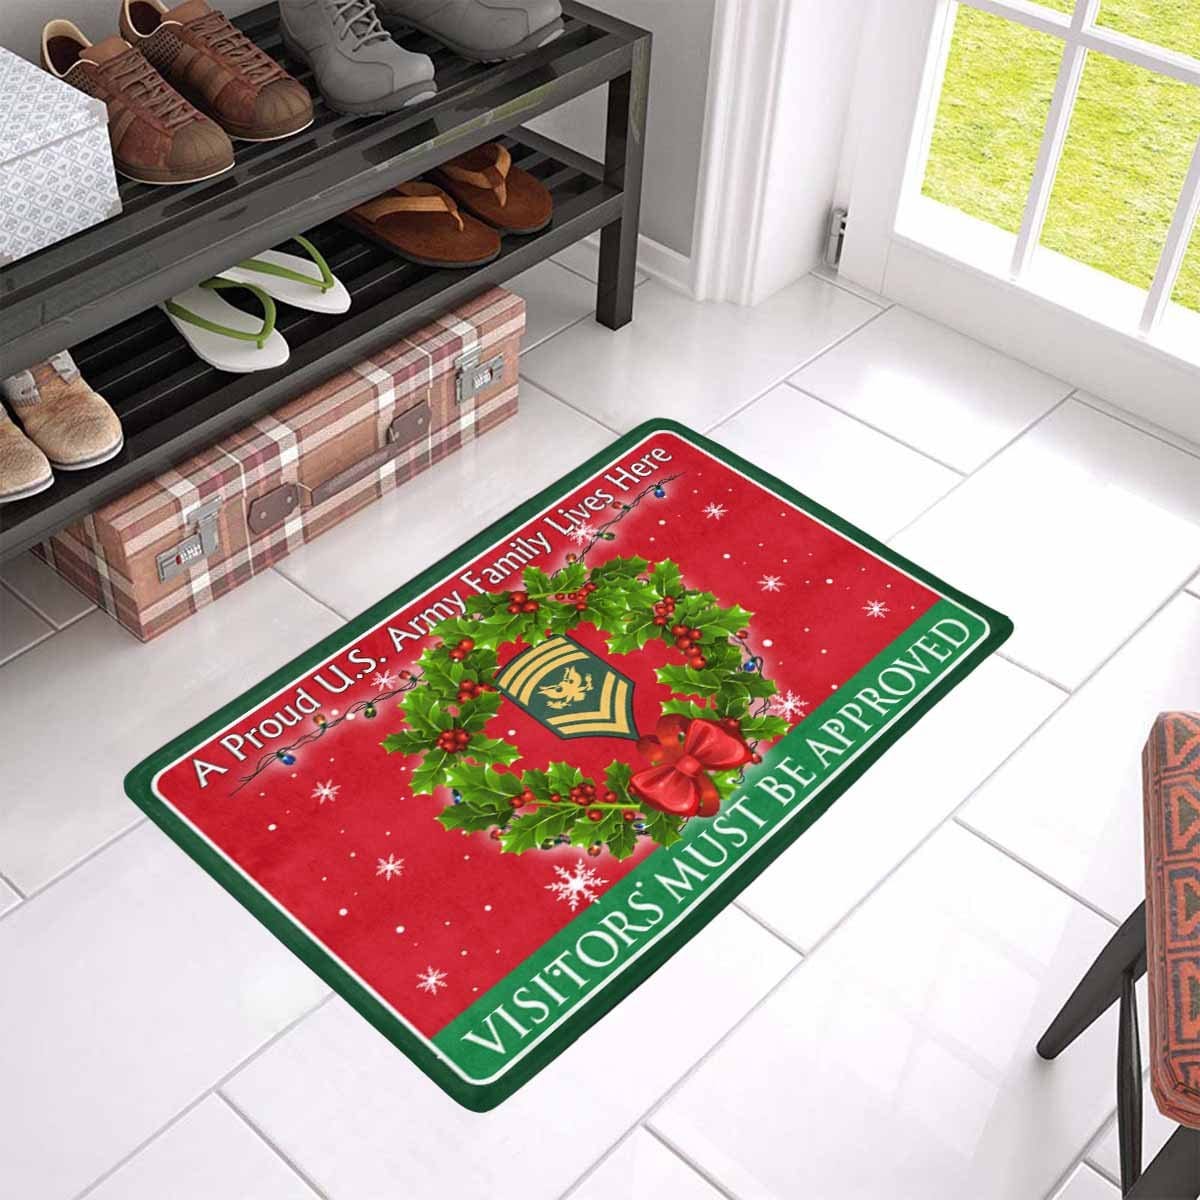 US Army E-9 SPC E9 Specialist Ranks - Visitors must be approved Christmas Doormat-Doormat-Army-Ranks-Veterans Nation